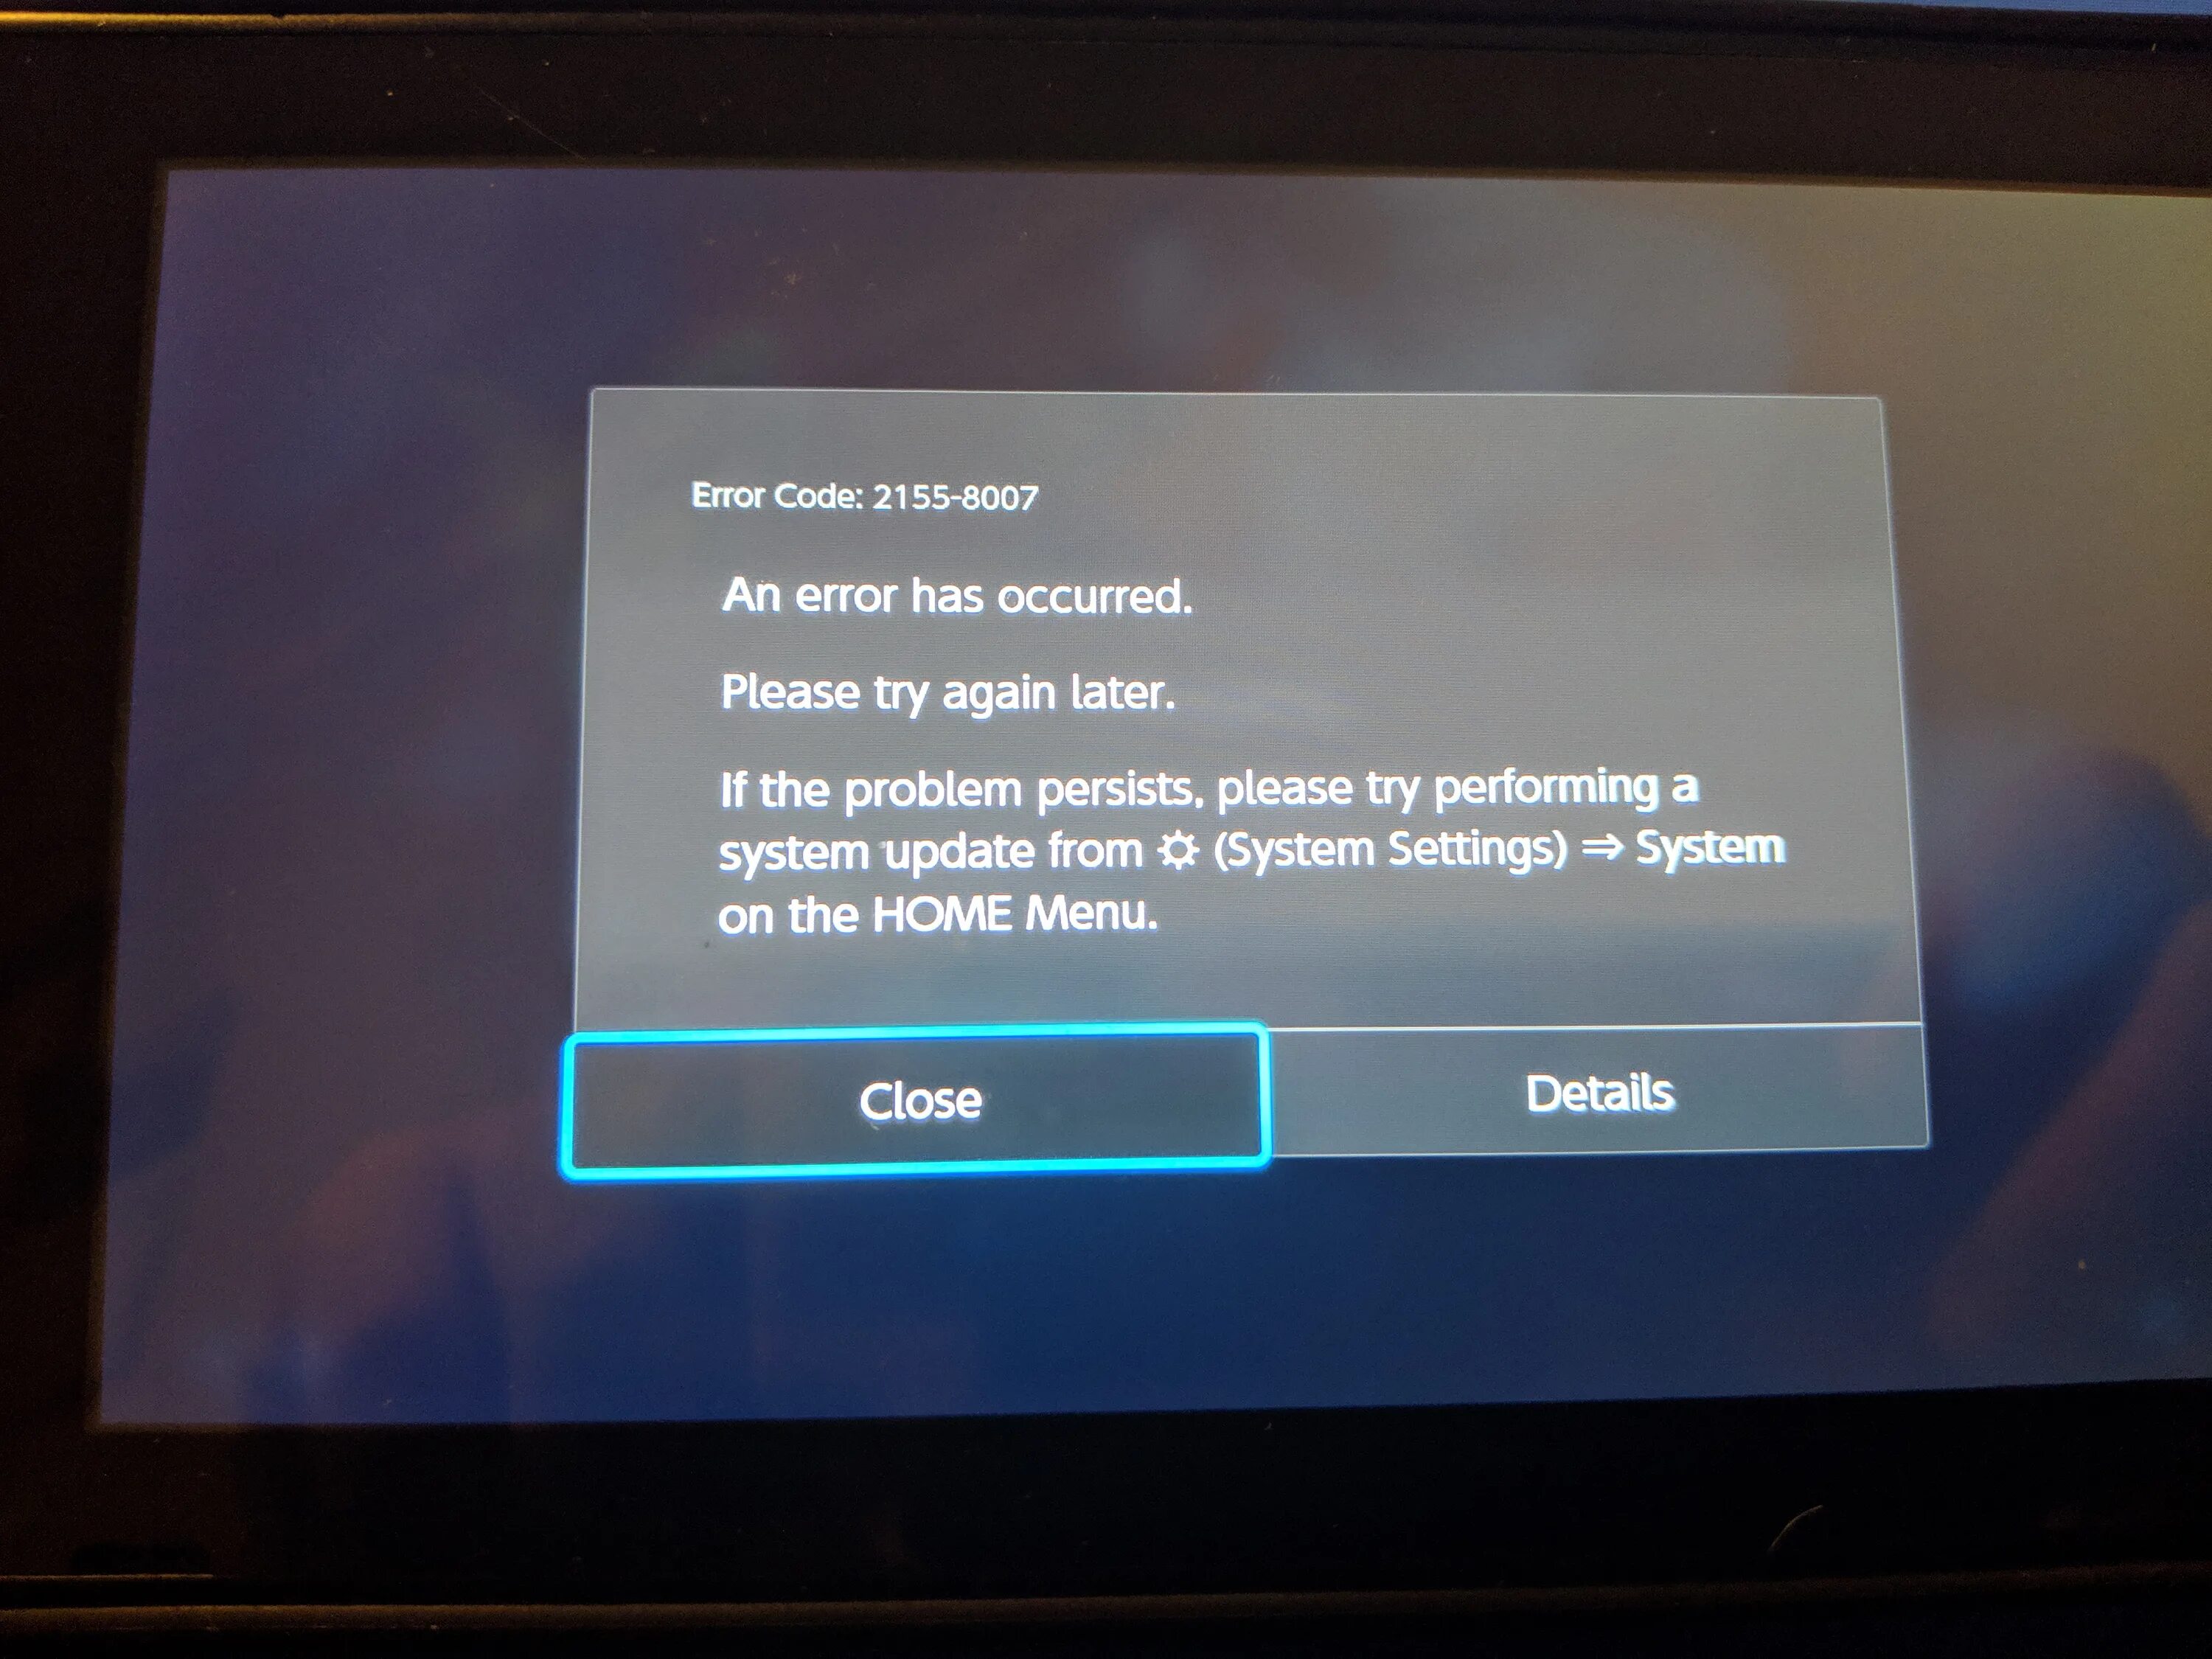 An Error occurred please try again later. An Error has occurred Nintendo Switch. An Error occurred please try again later youtube на телевизоре самсунг. The software was closed because an Error occurred Nintendo Switch.